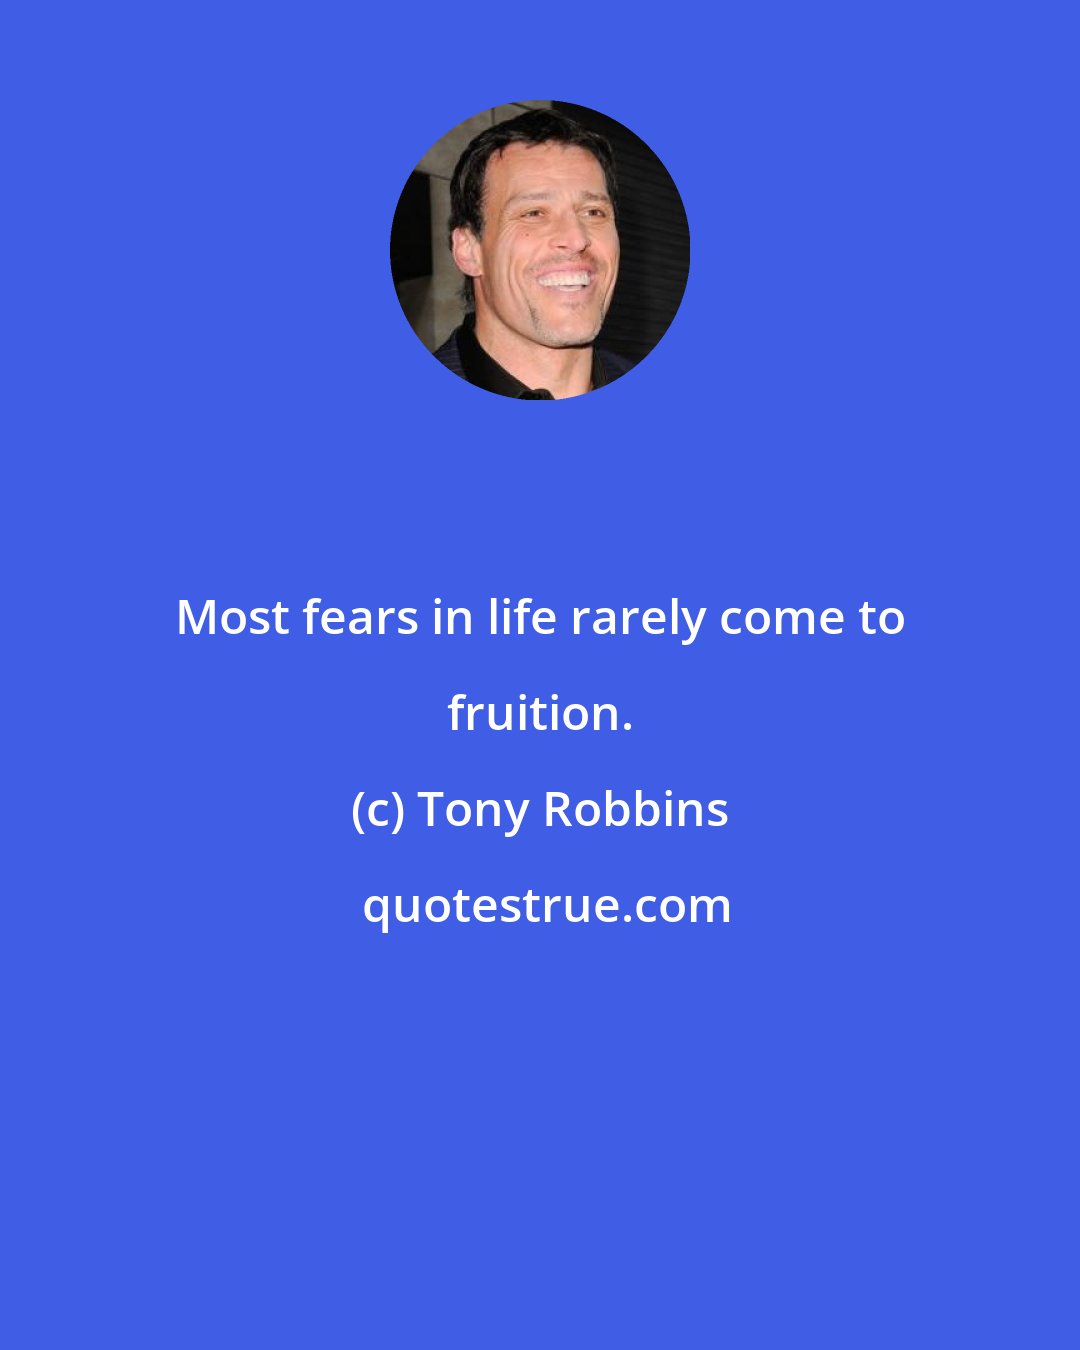 Tony Robbins: Most fears in life rarely come to fruition.